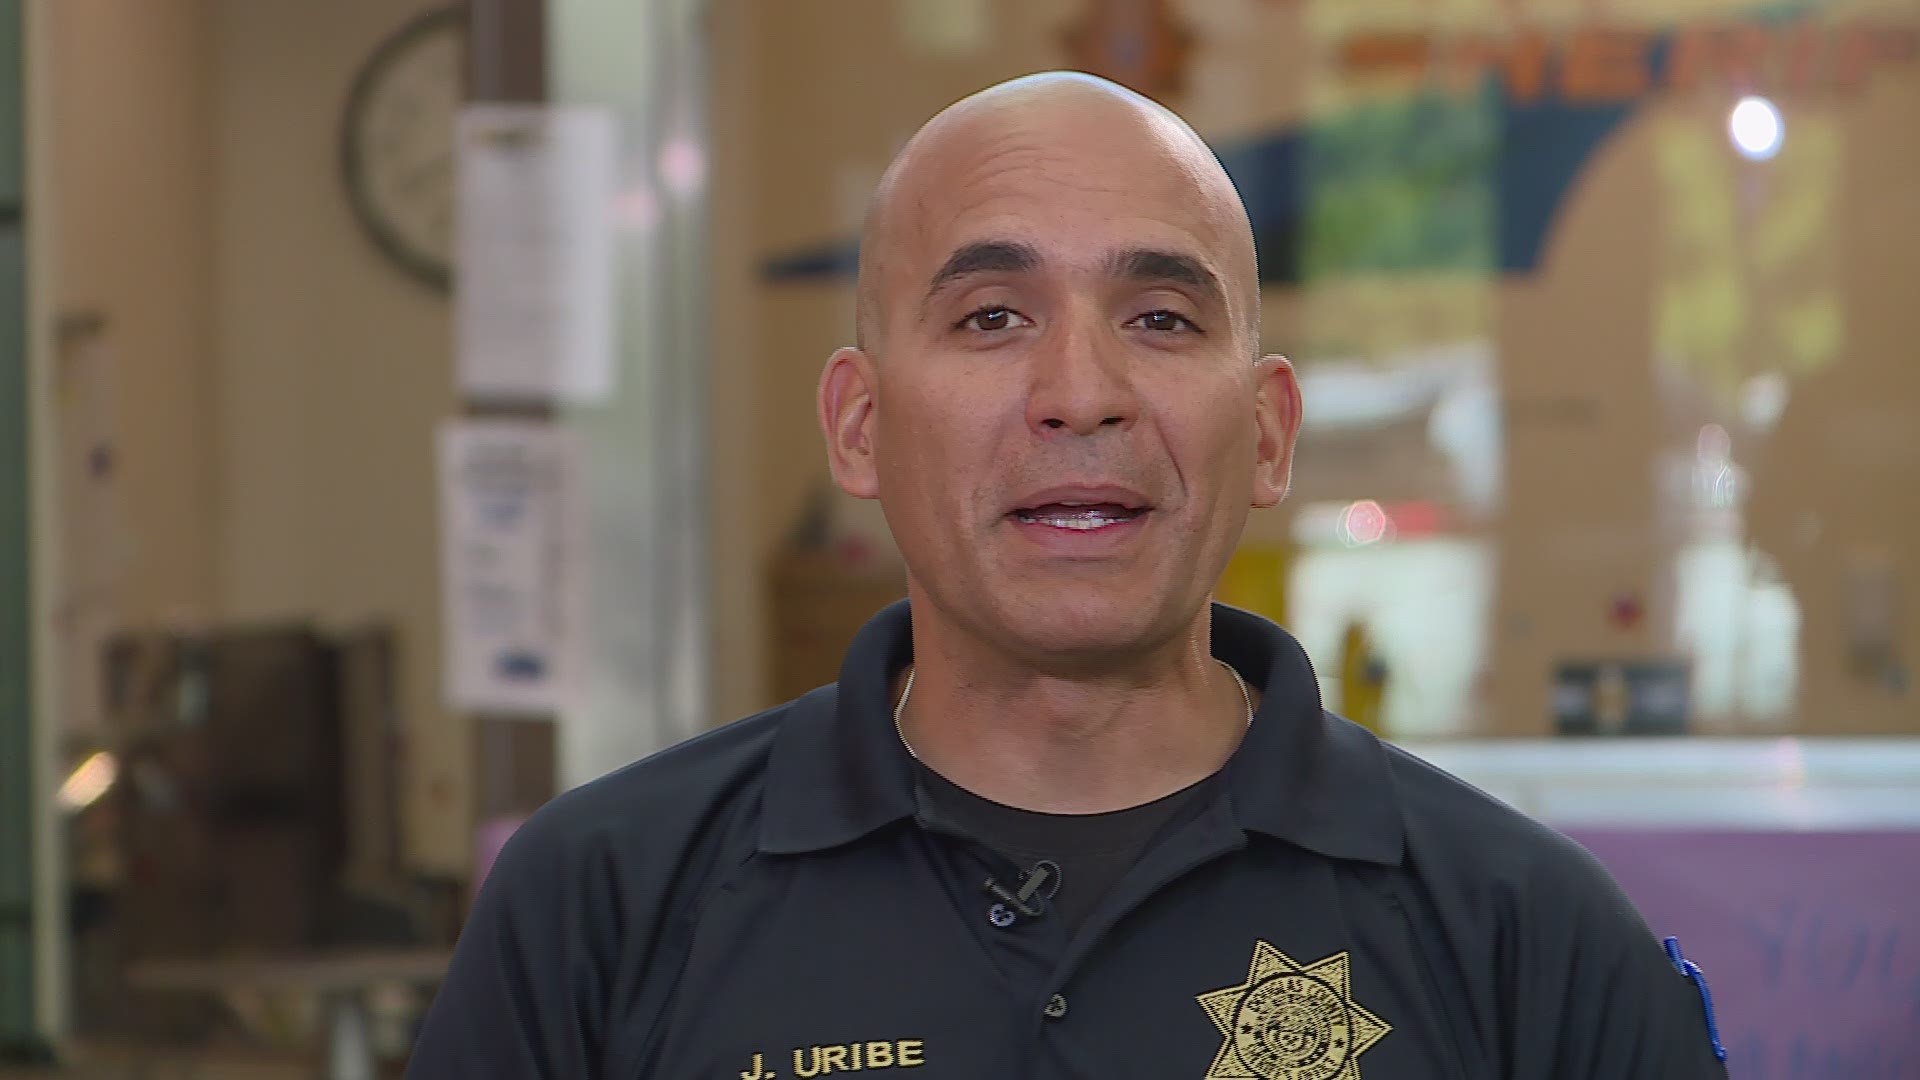 Deputy Gabe Uribe spoke exclusively to 9NEWS before his first day on-duty Wednesday.